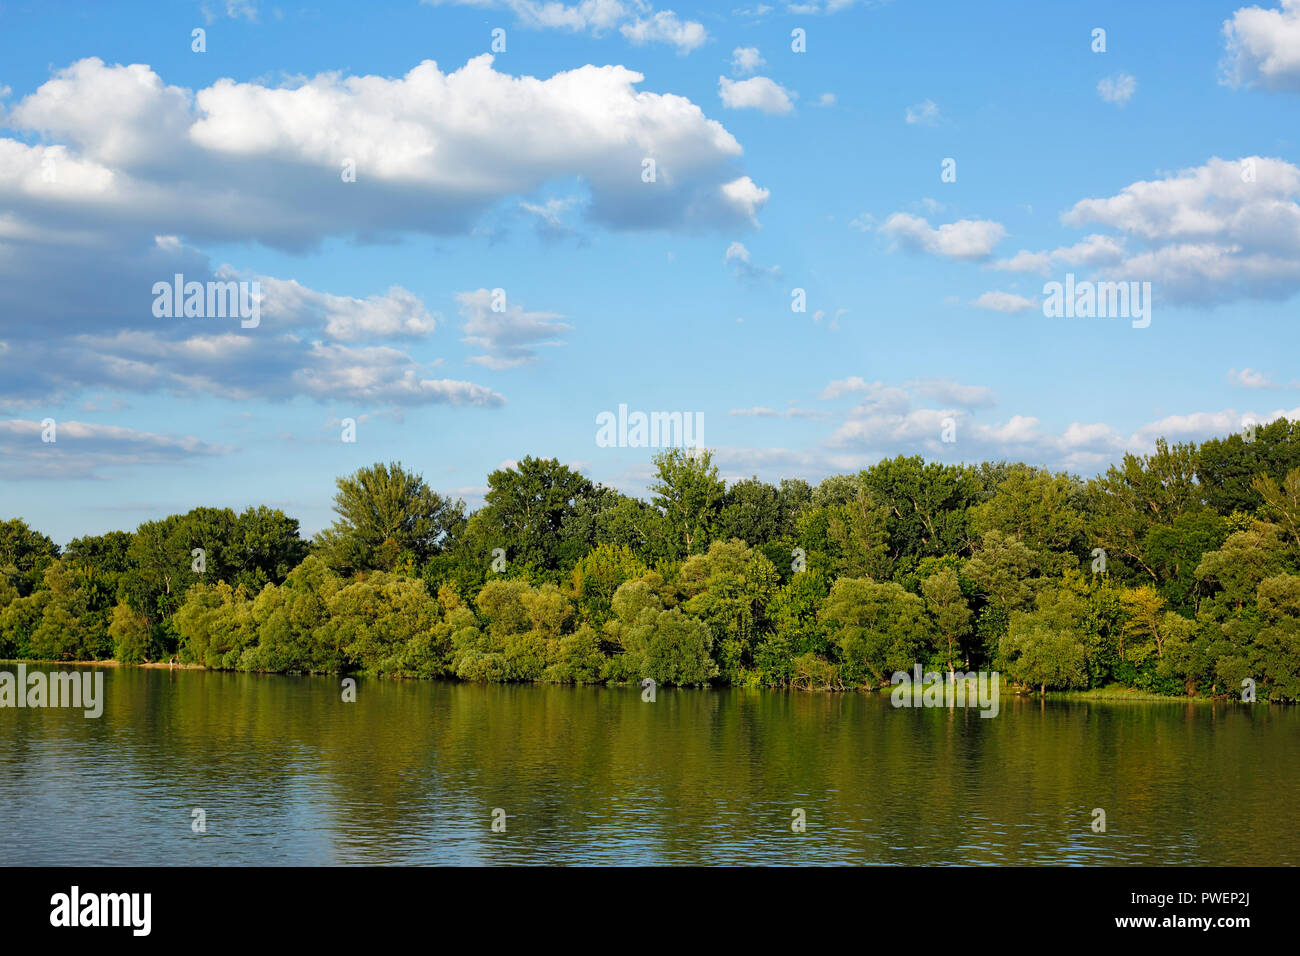 Danube landscape in northern Budapest, river landscape, Danube bank, woodland, evening, cumulus clouds, Hungary, Central Hungary, Capital City, UNESCO World Heritage Site Stock Photo